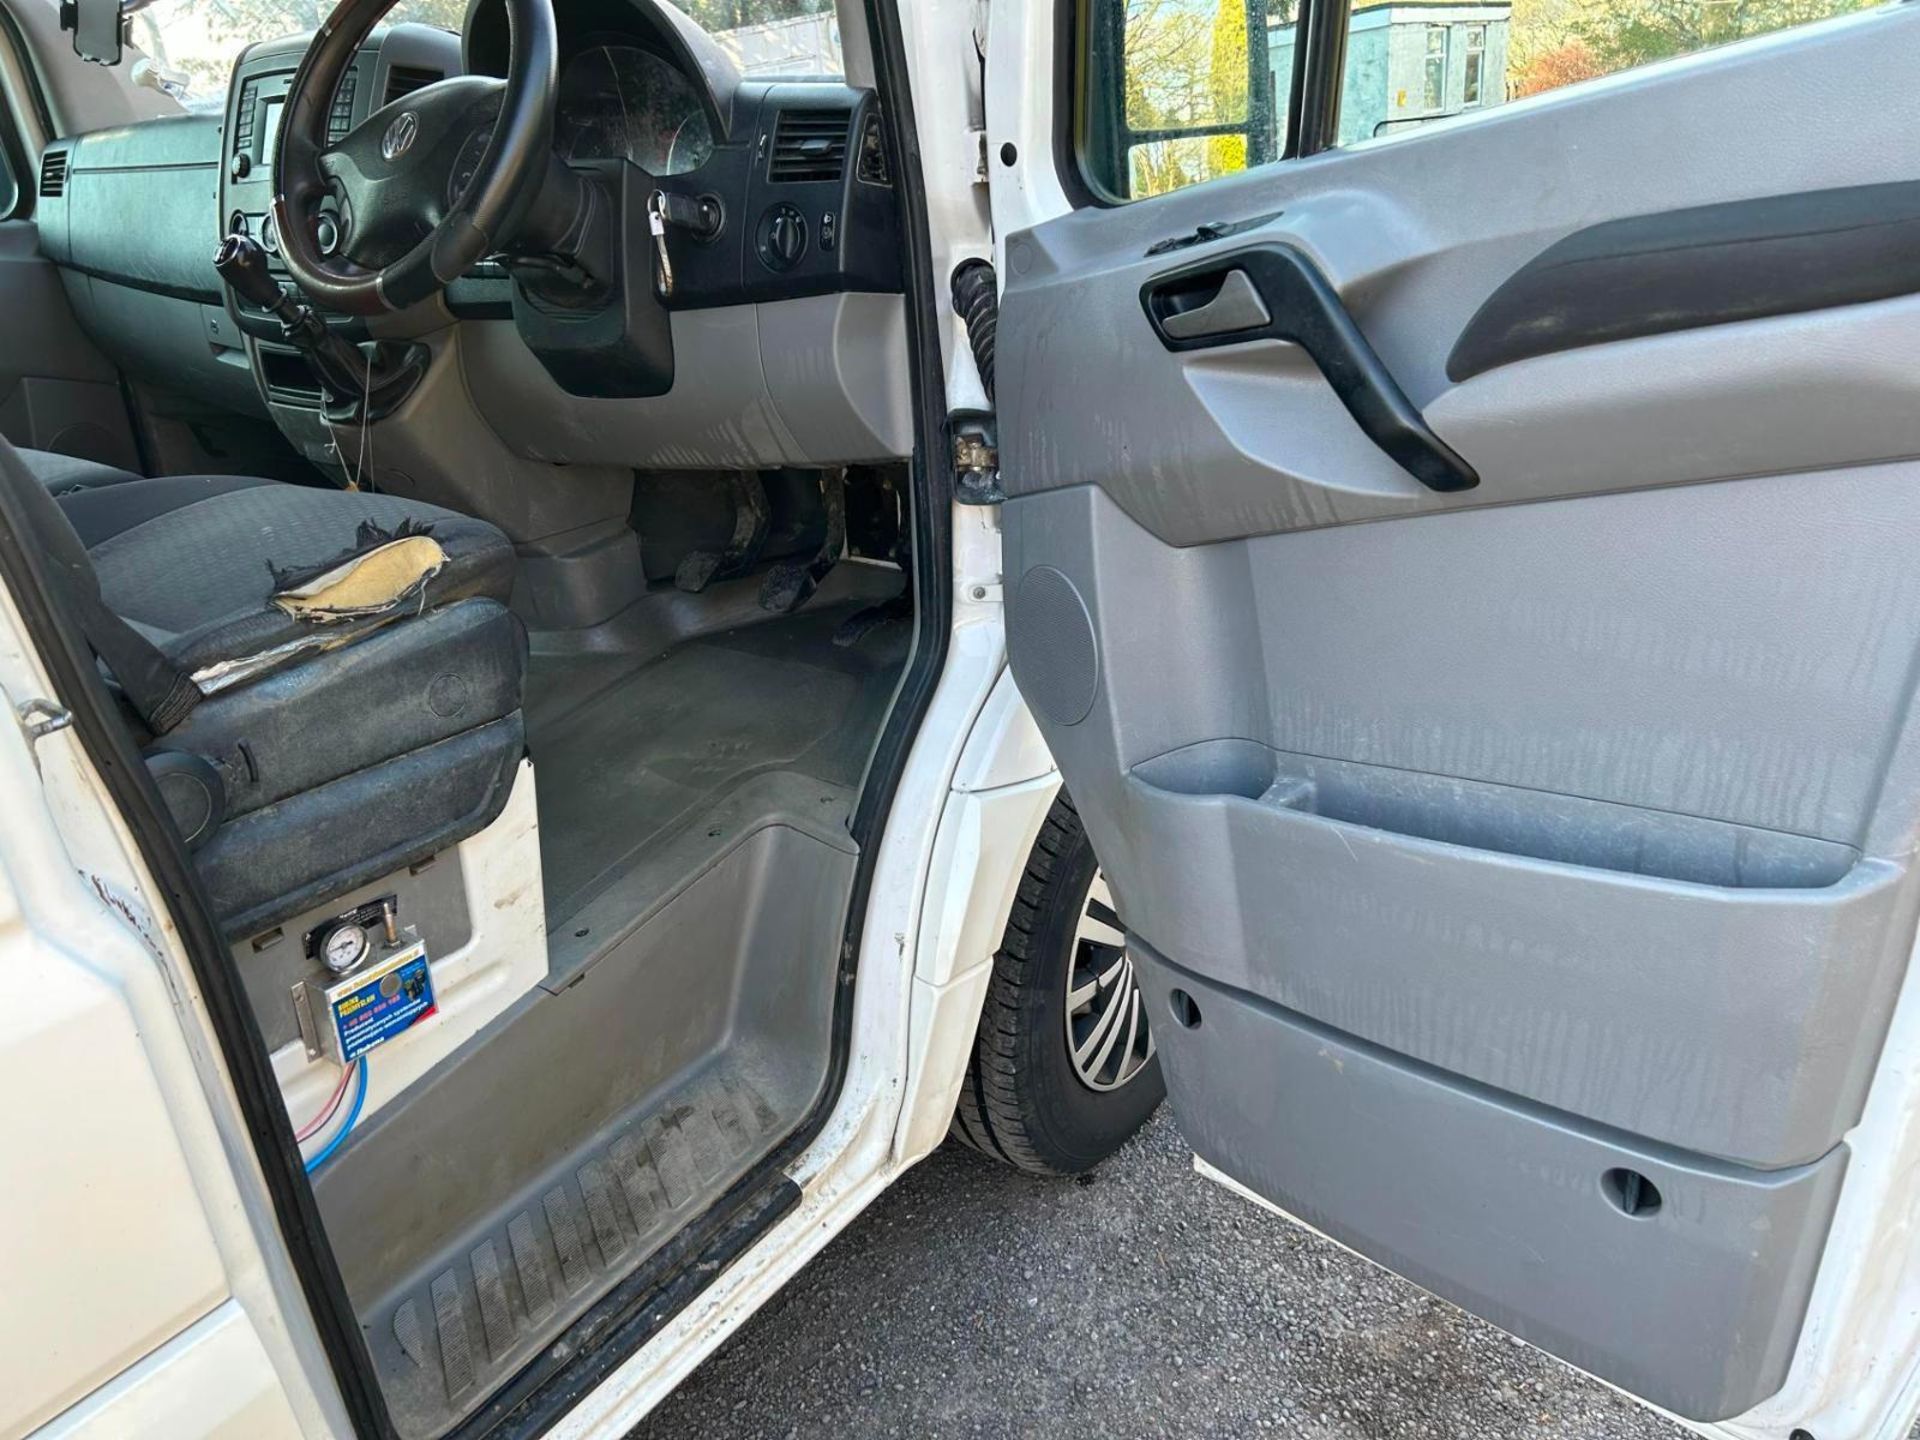 2014 VOLKSWAGEN CRAFTER CR35 TDI 136BHP - RELIABLE LONG WHEEL BASE 17FT RECOVERY VEHICLE - Bild 4 aus 16